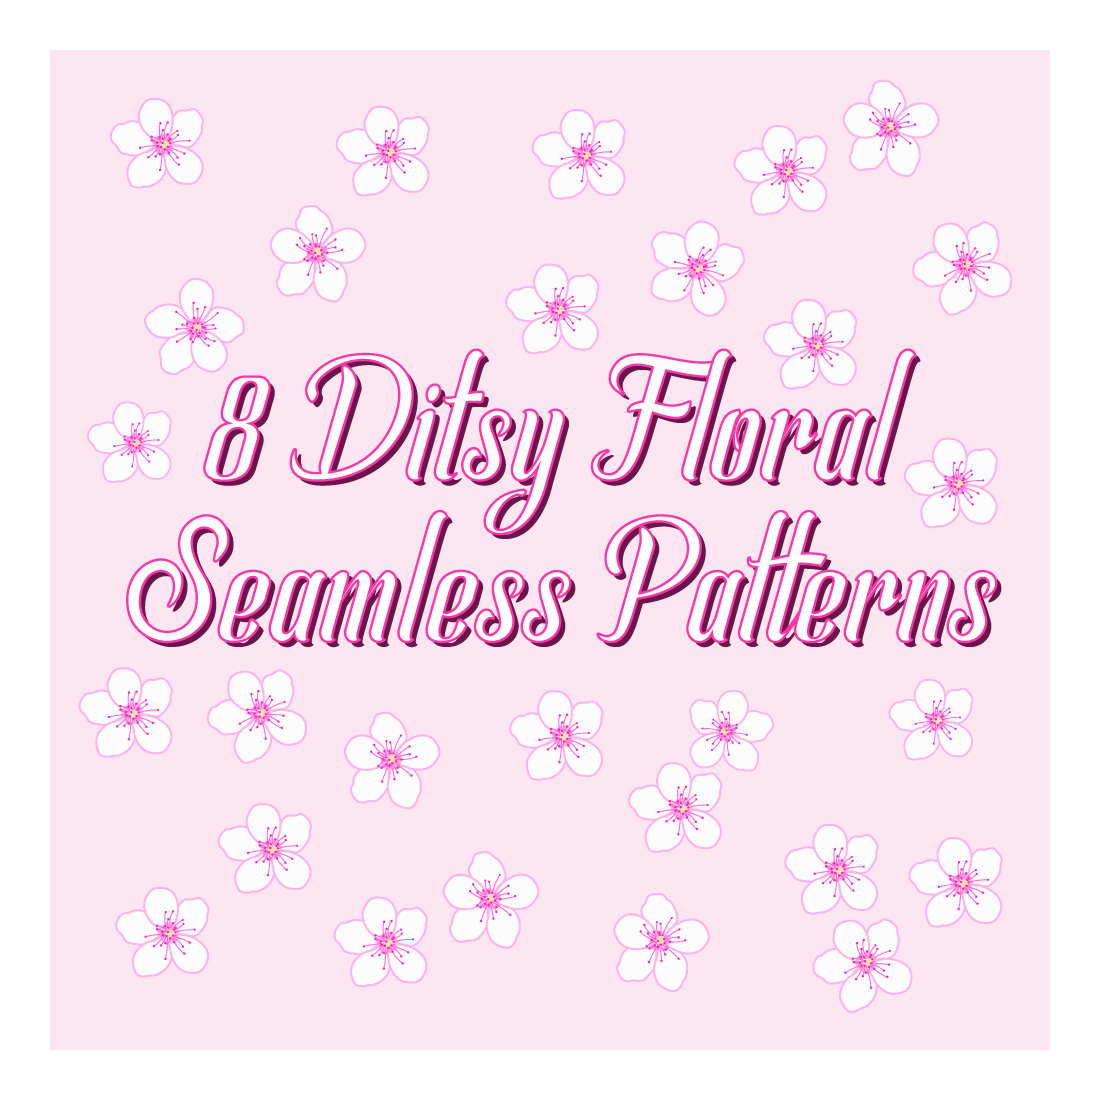 Set of high-quality patterns with flowers.